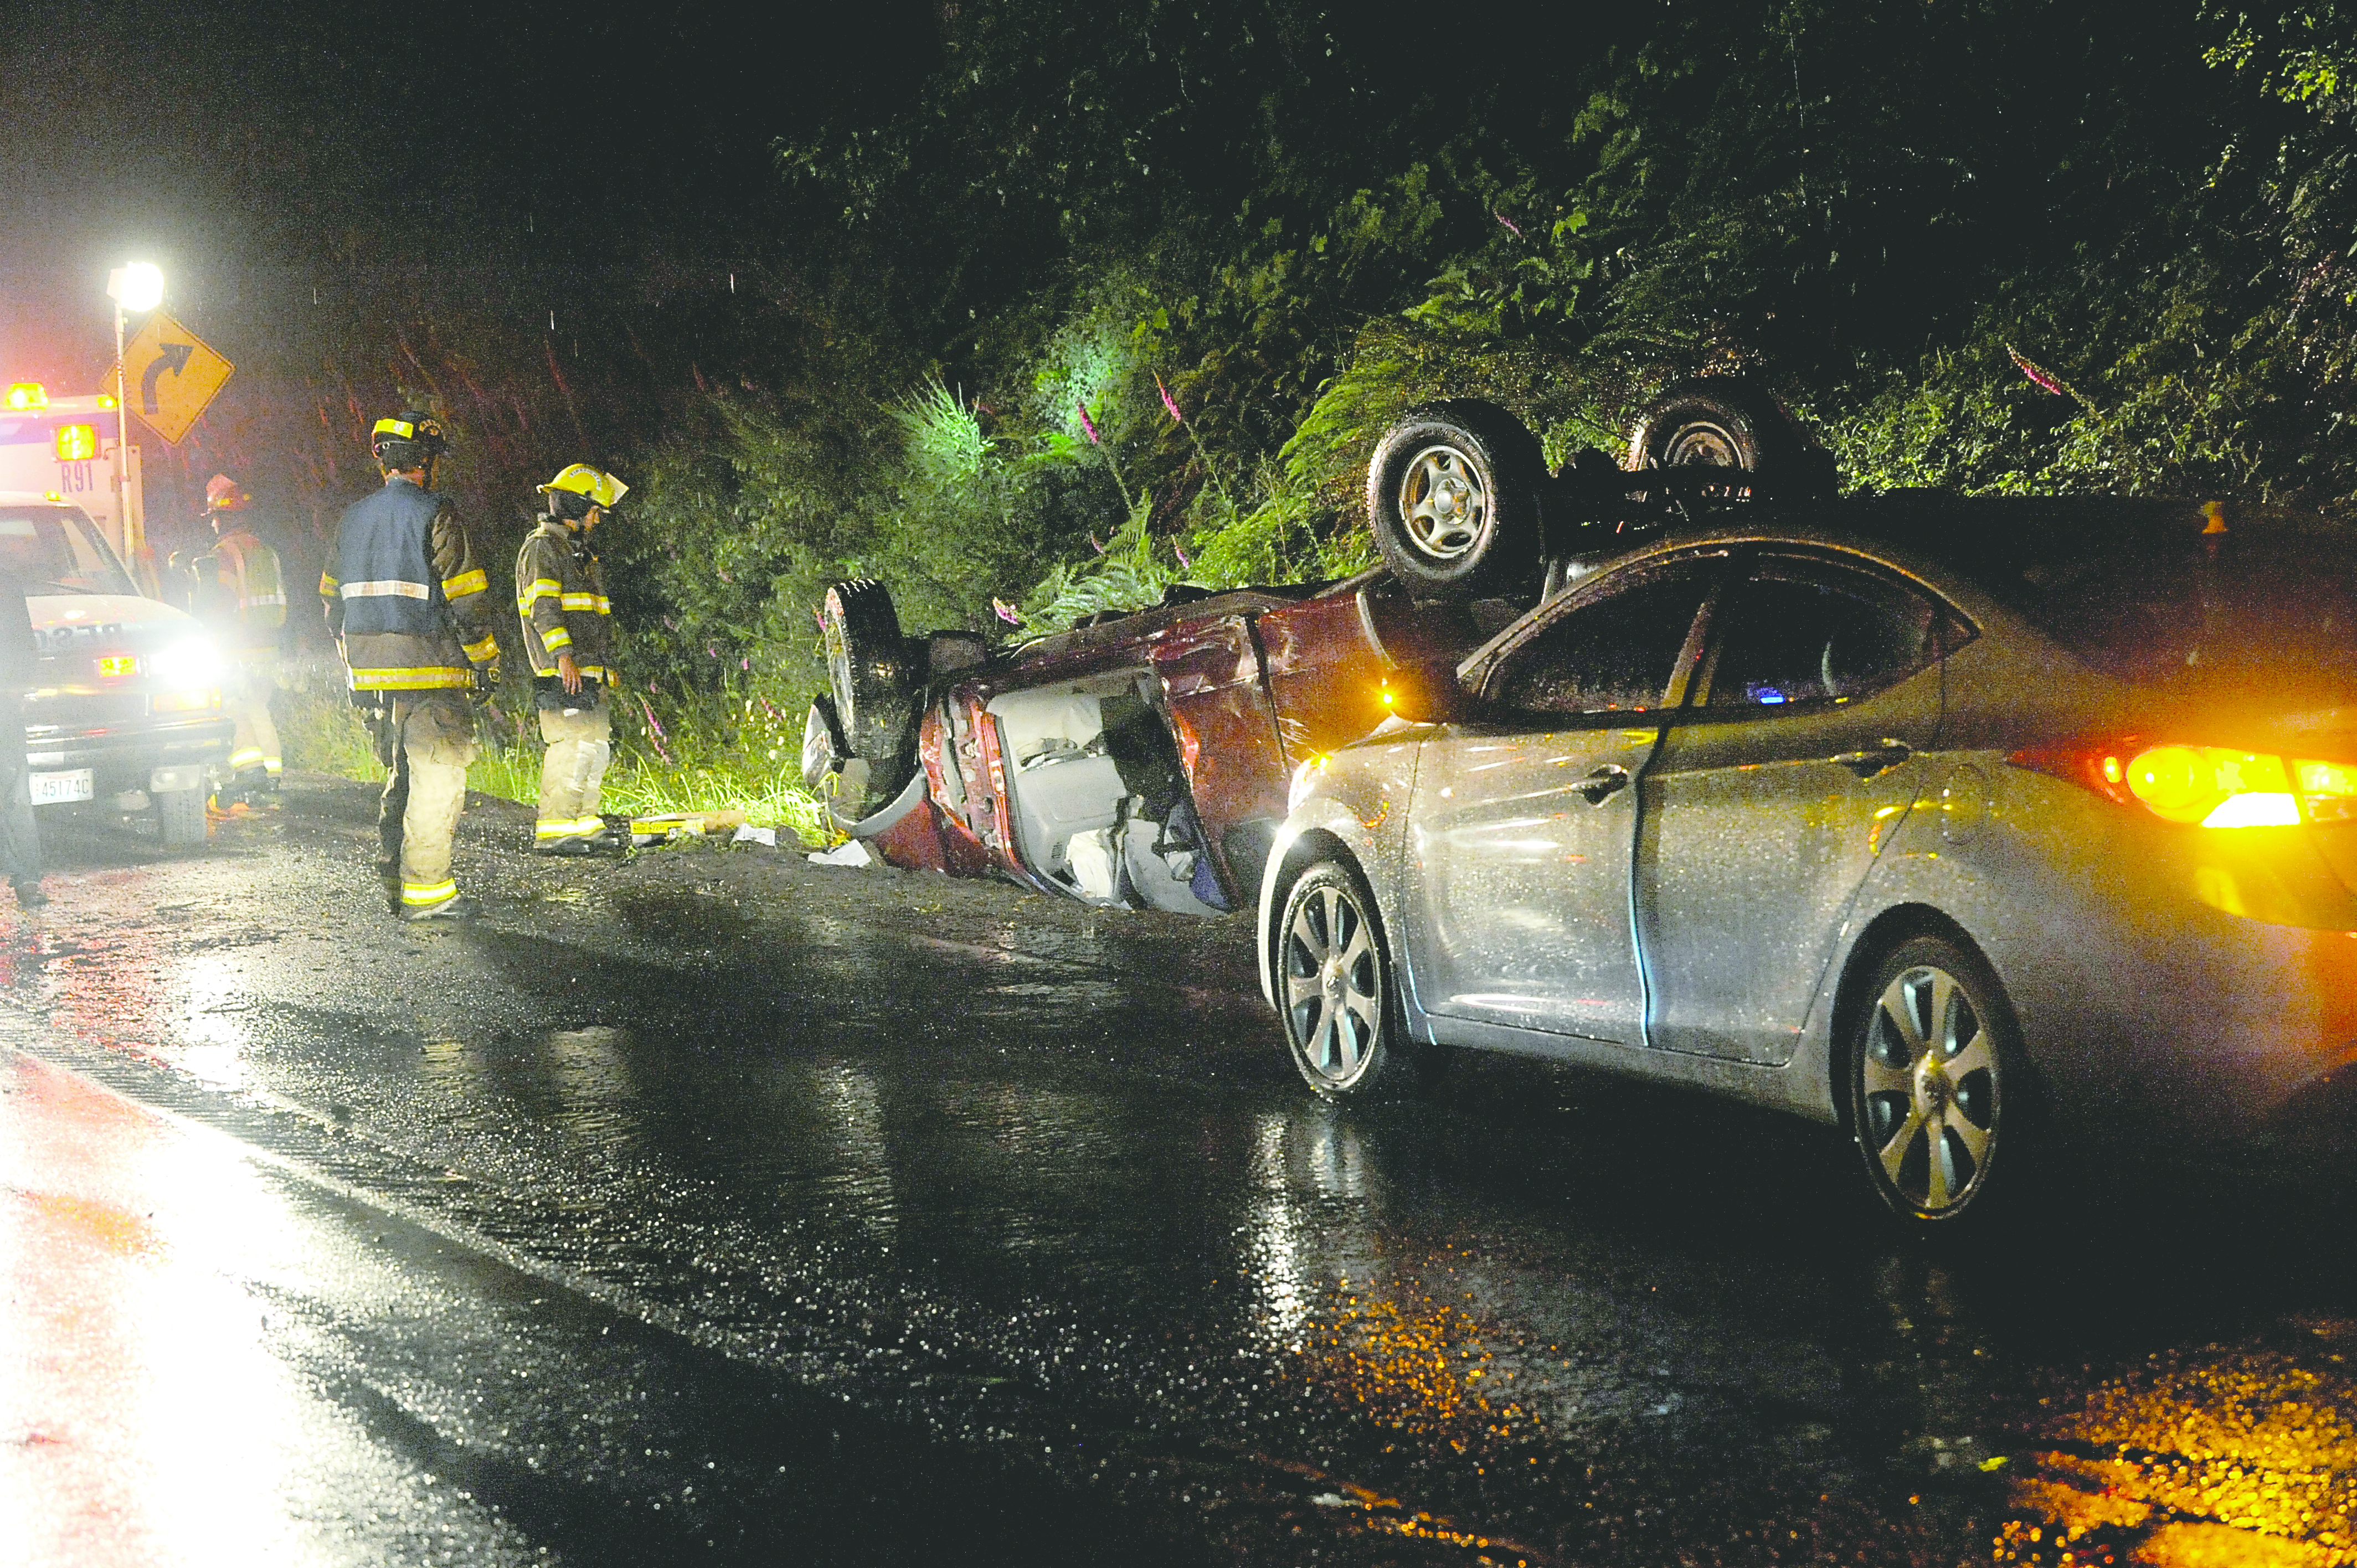 Forks firemen from Clallam County Fire District No. 1 inspect an overturned vehicle on U.S. Highway 101 a mile south of Forks early Saturday morning. Lonnie Archibald/for Peninsula Daily News